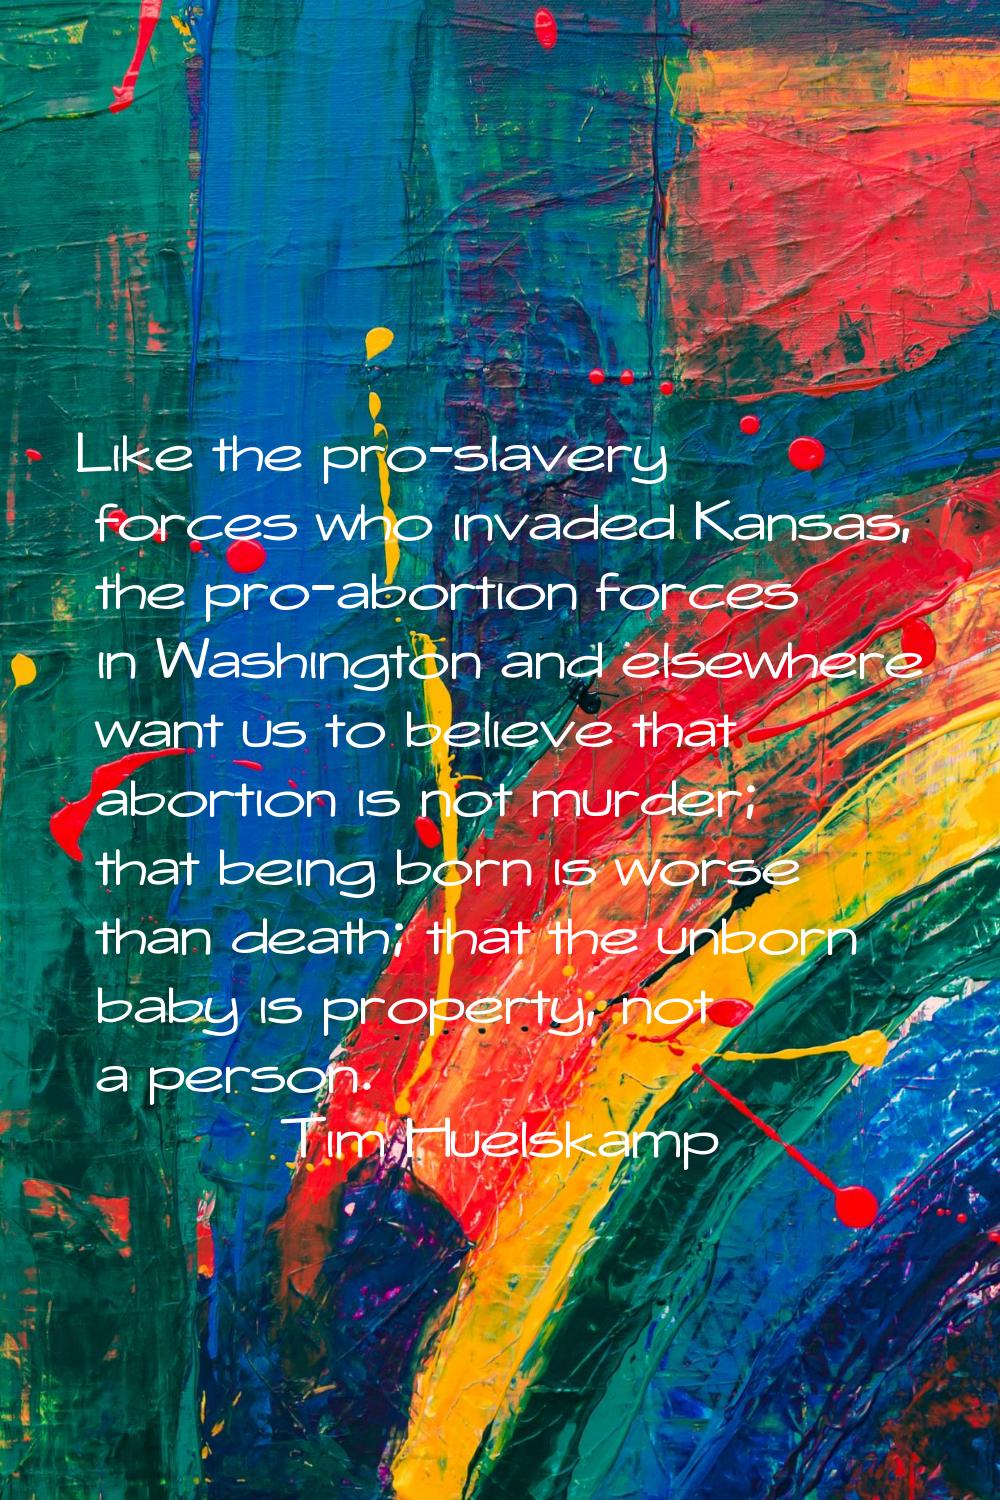 Like the pro-slavery forces who invaded Kansas, the pro-abortion forces in Washington and elsewhere